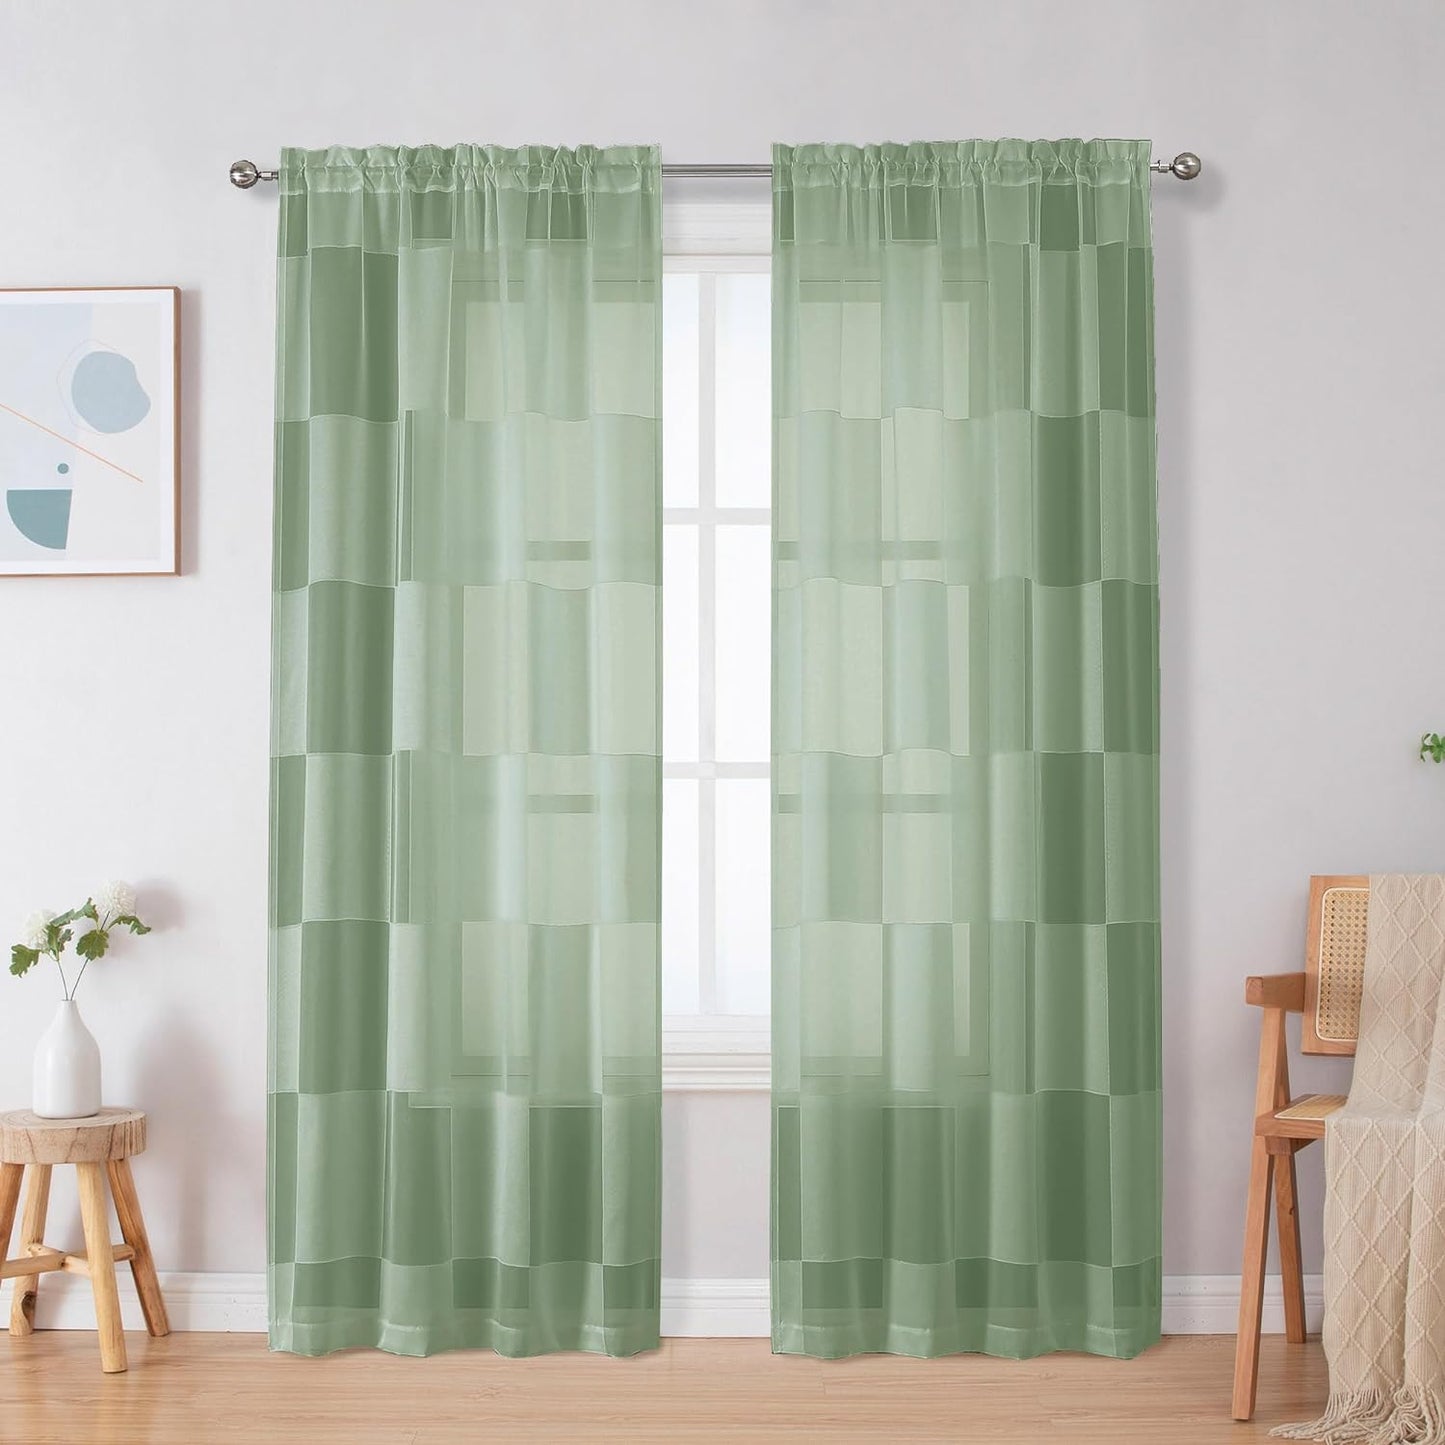 OVZME Sage Green Sheer Bedroom Curtains 84 Inch Length 2 Panels Set, Dual Rod Pocket Clip Checkered Window Curtains for Living Room, Light Filtering & Privacy Sheer Green Drapes, Each 42W X 84L  OVZME Sage Green 42W X 84L 